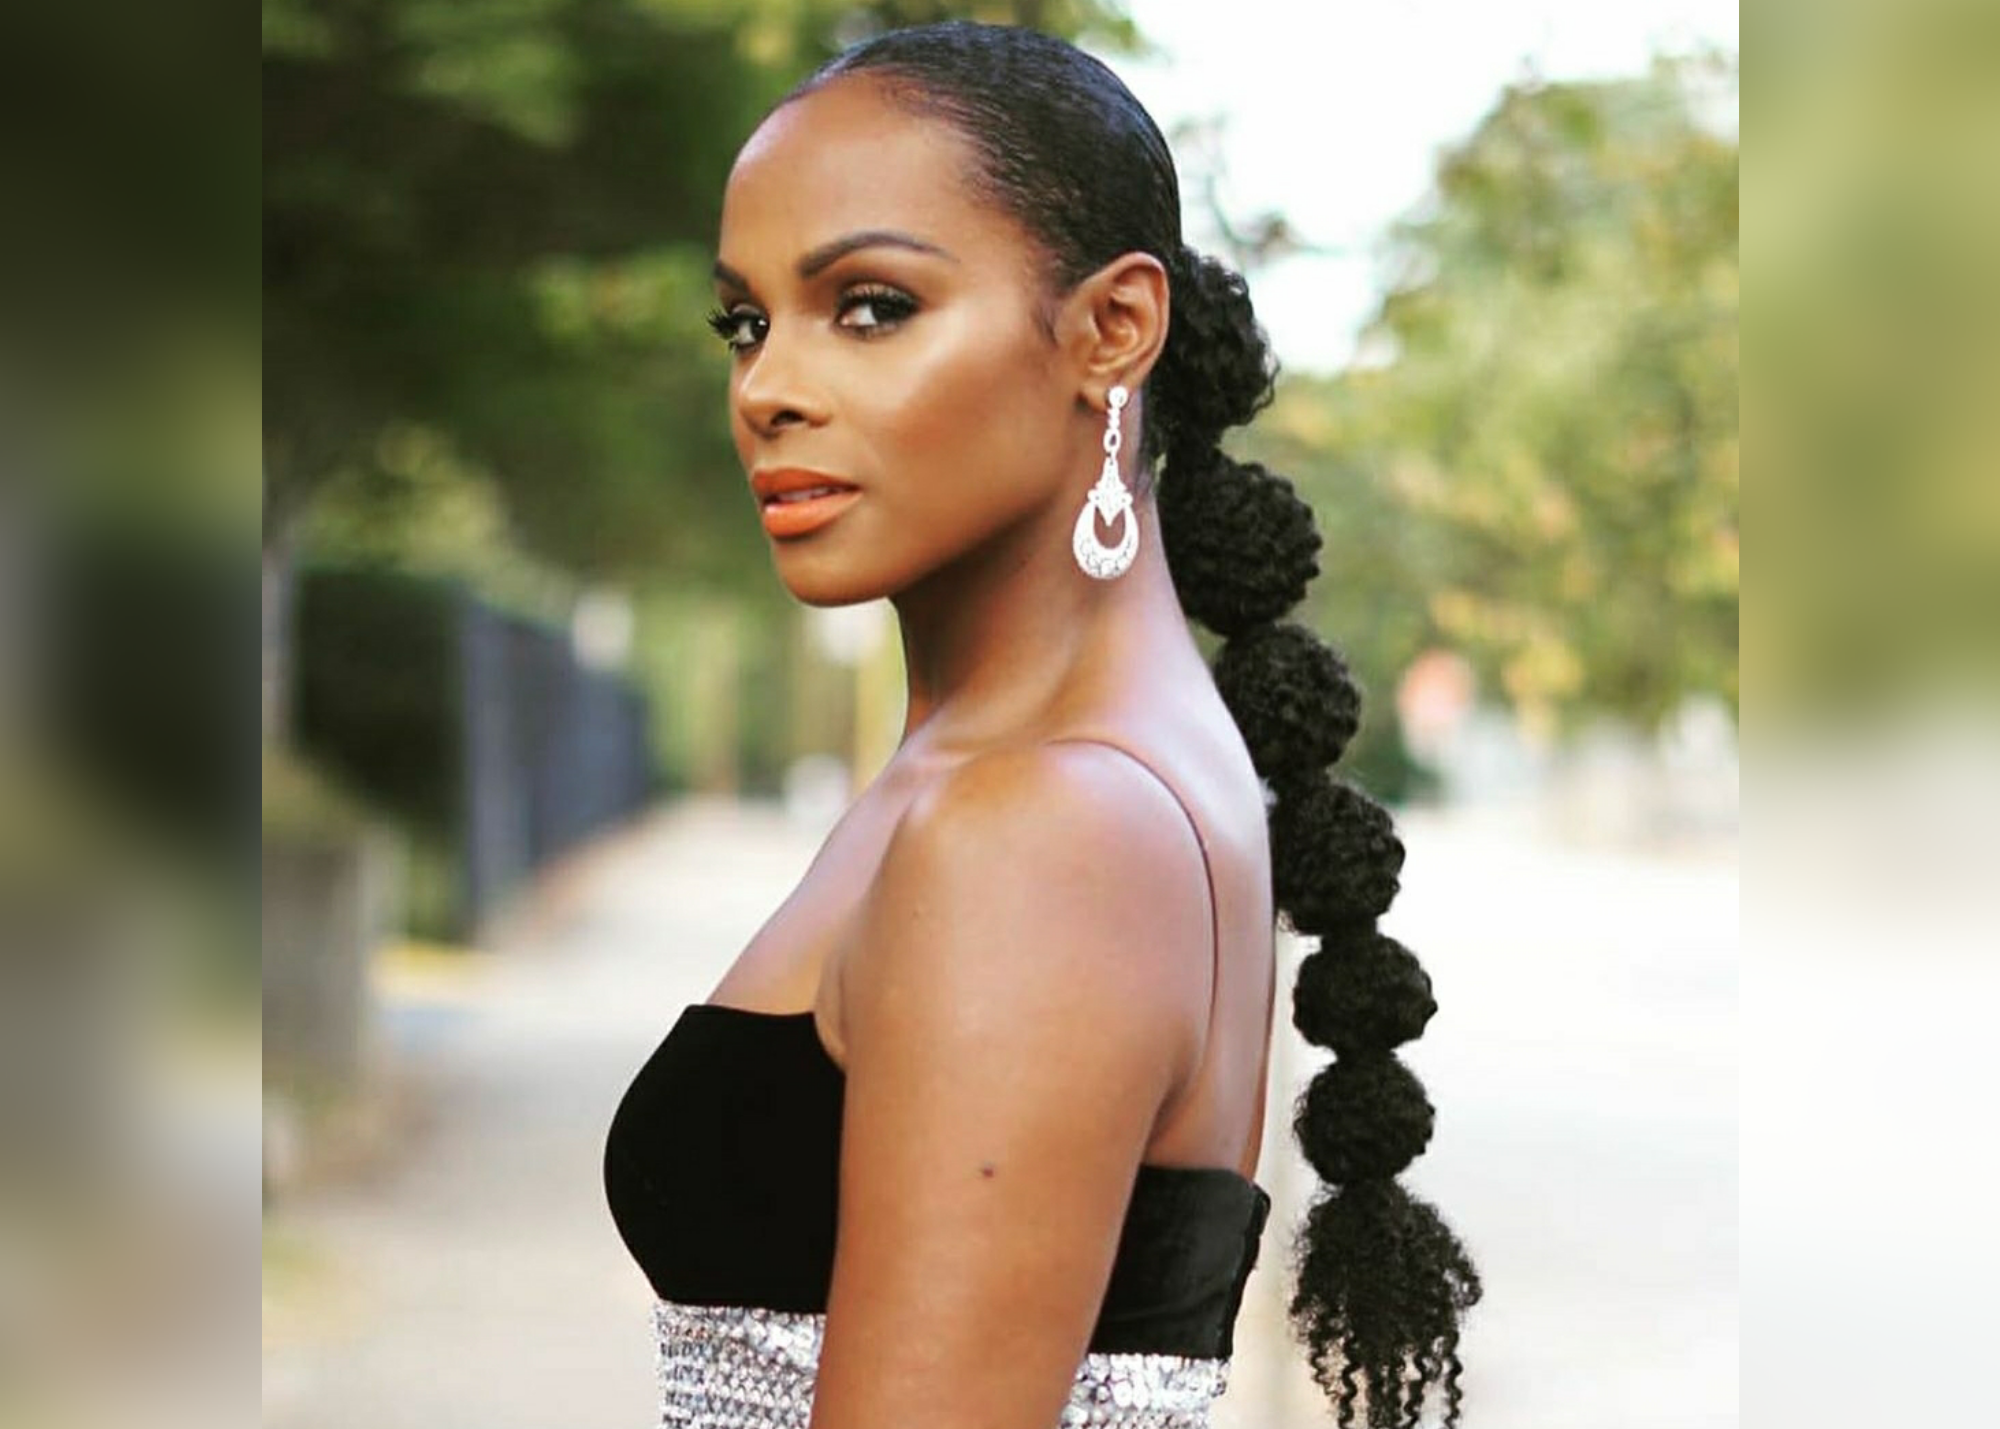 Tika Sumpter To Star In HBO Max’s “The Ancestor”